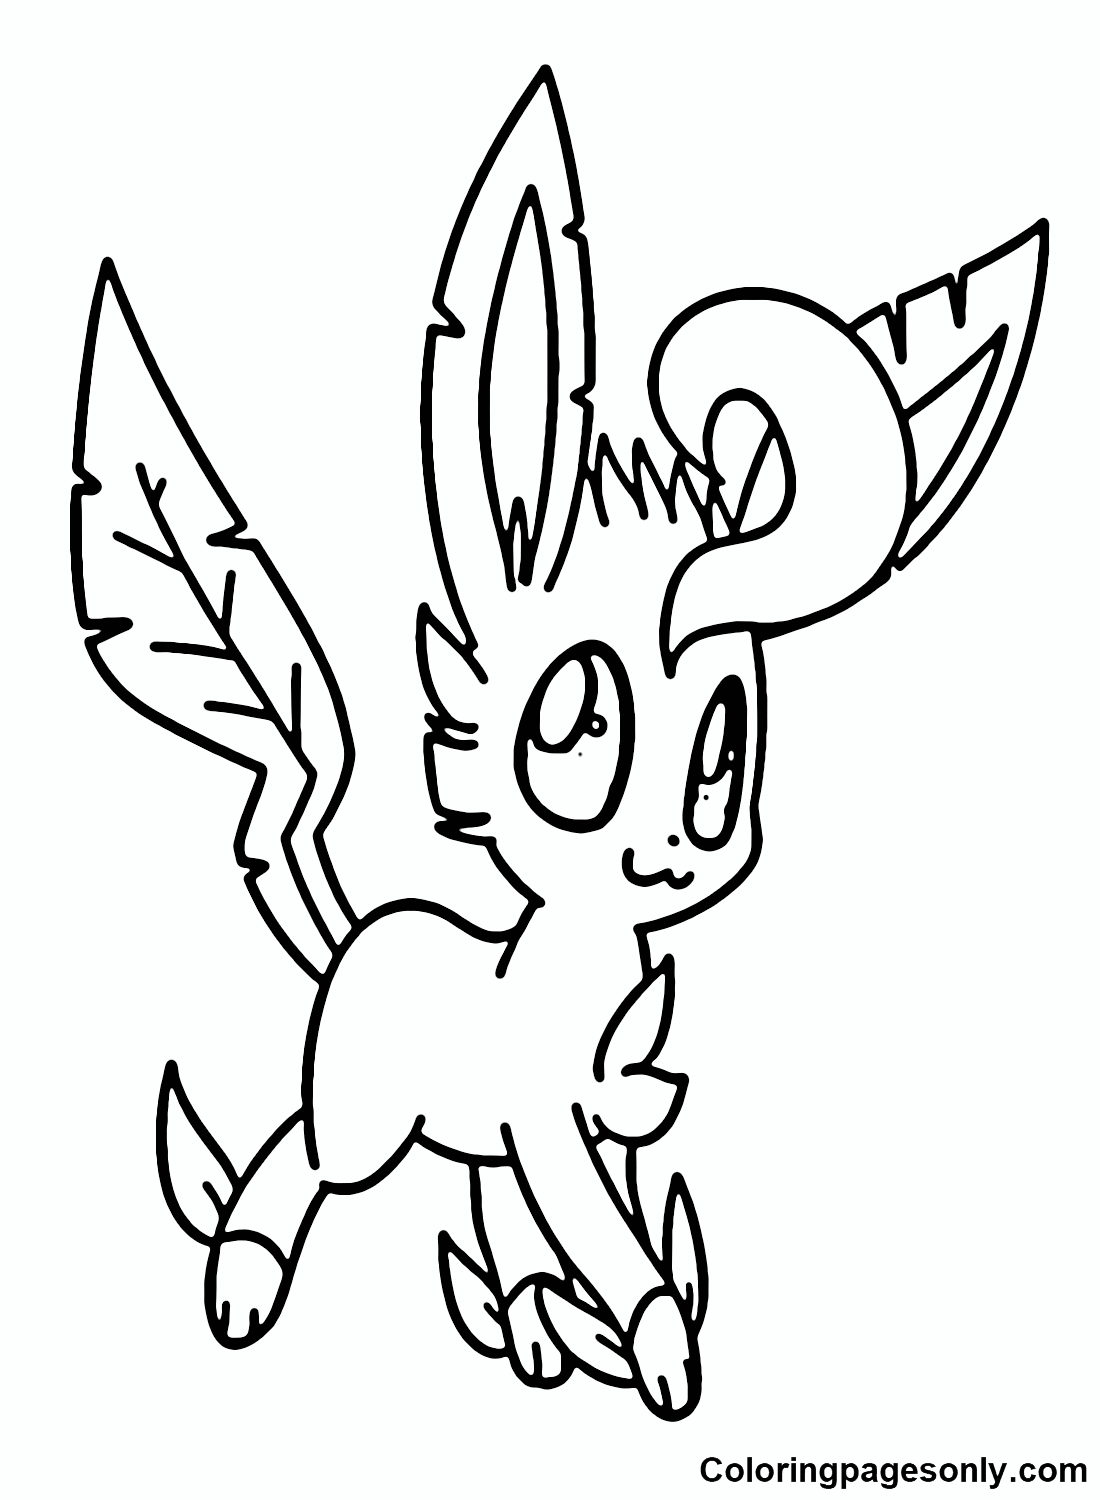 200 Eevee Coloring Pages: Evolve Your Art Skills 114